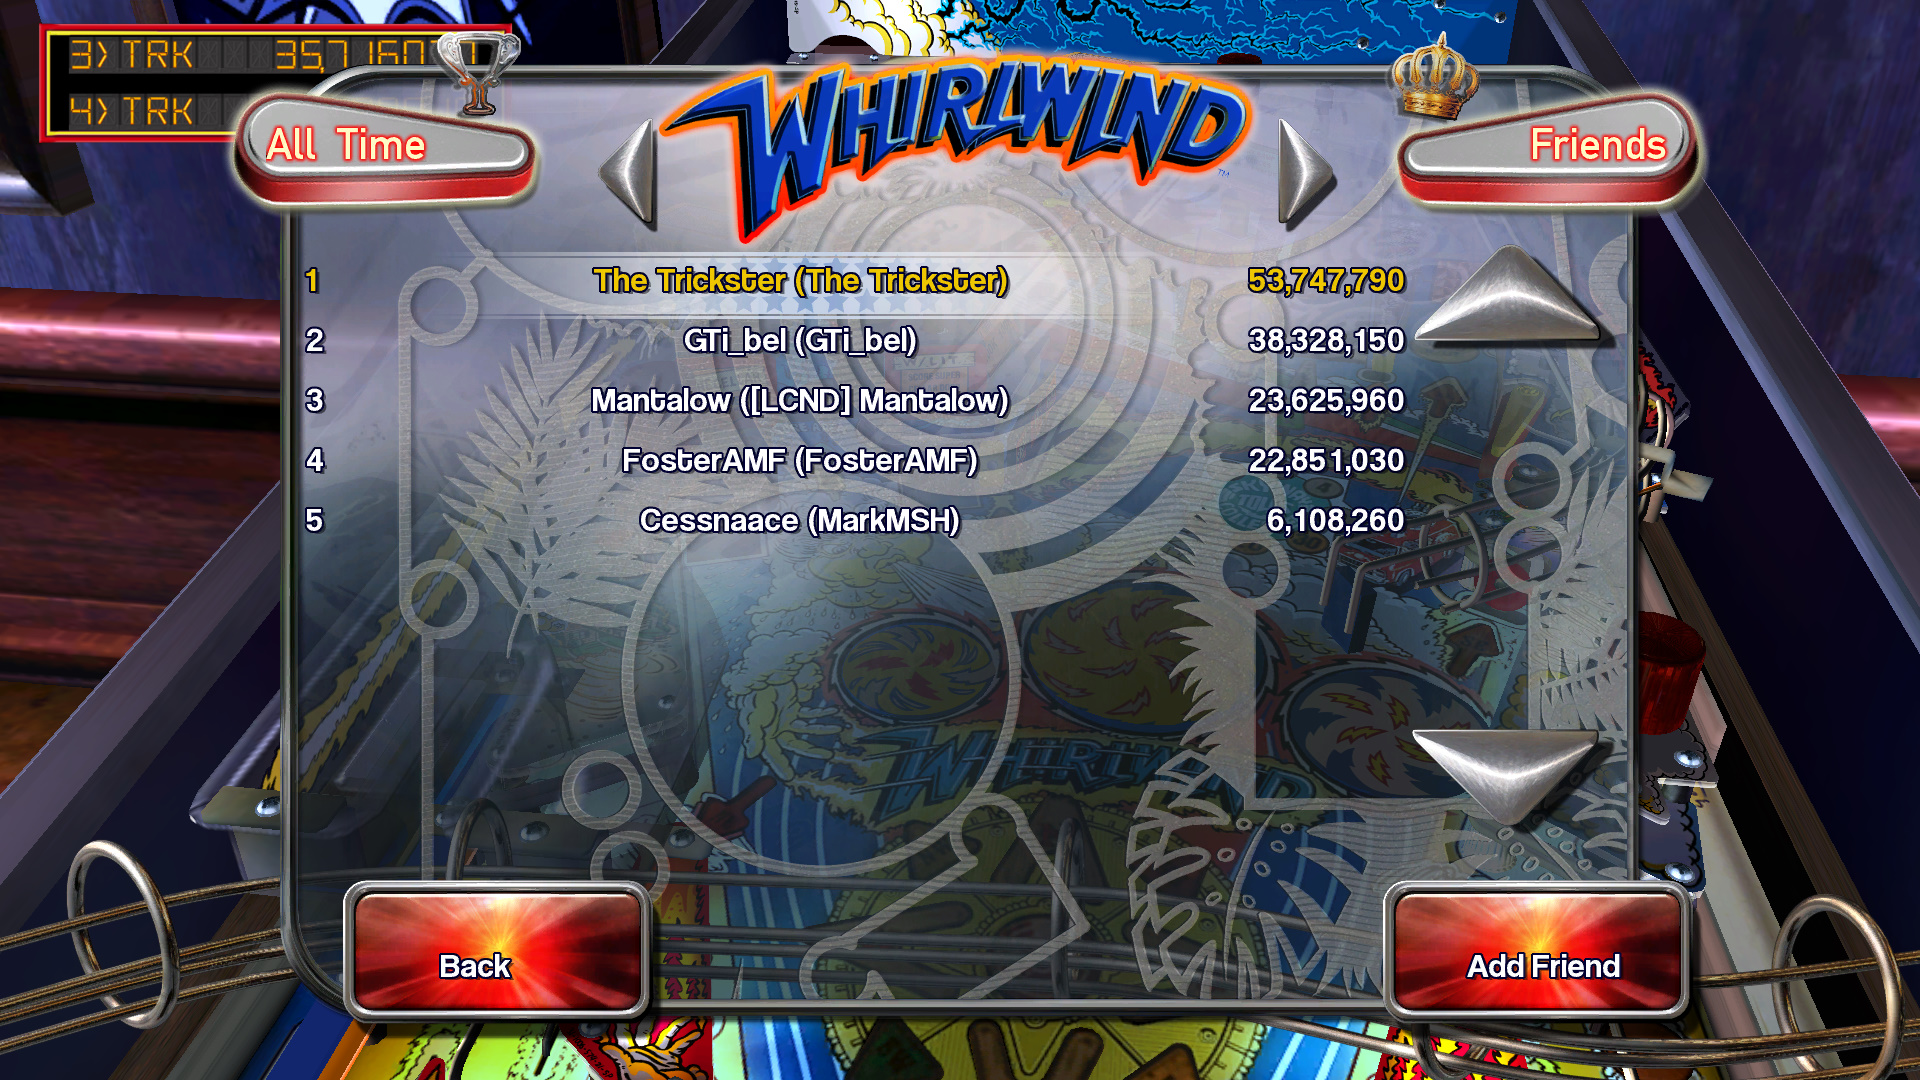 TheTrickster: Pinball Arcade: Whirlwind (PC) 53,747,790 points on 2015-10-10 15:33:12